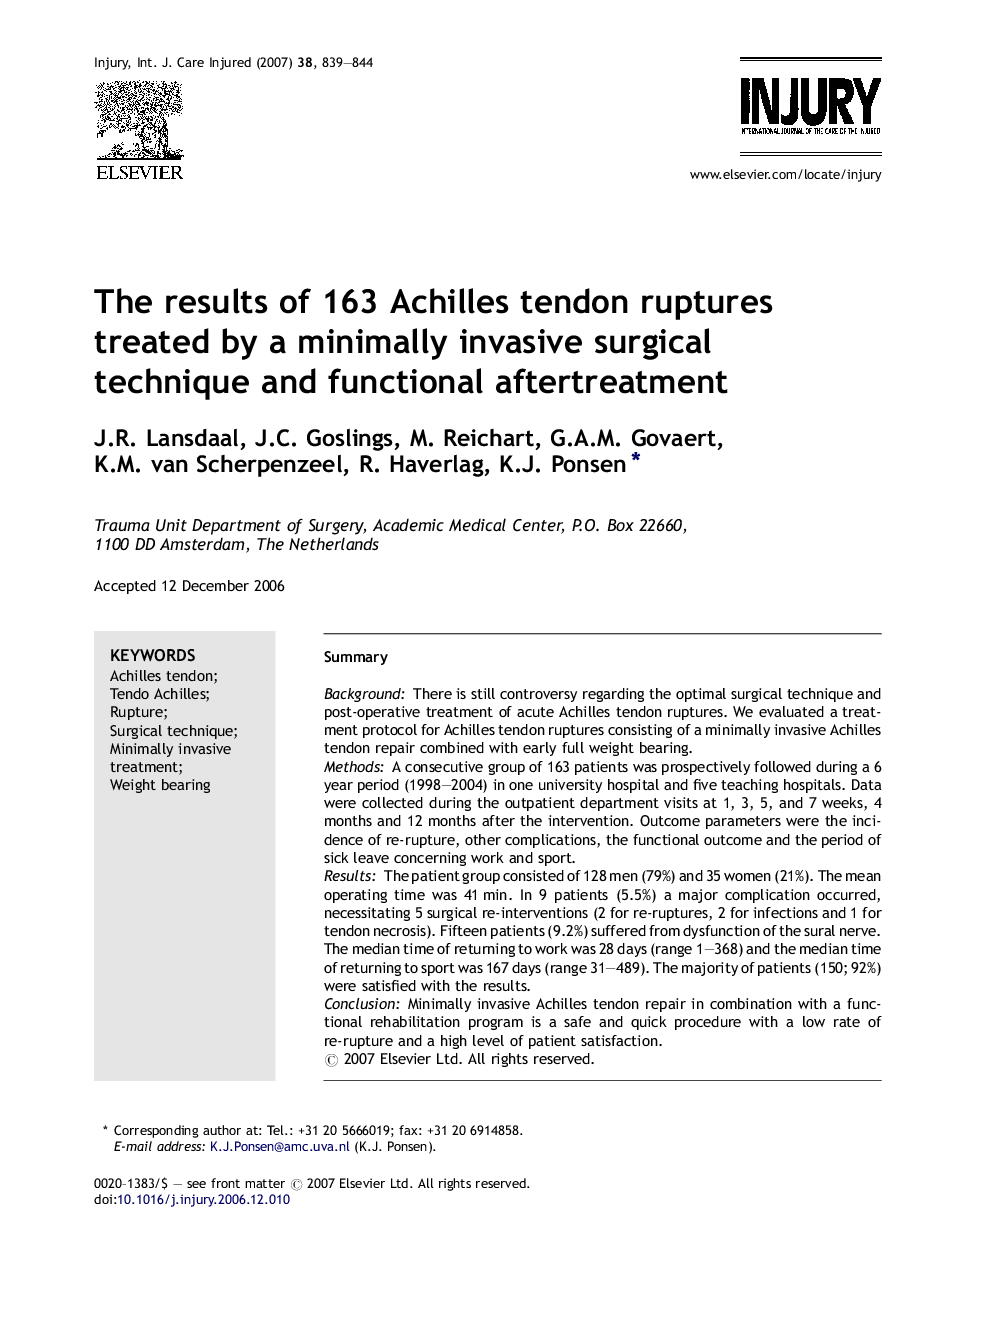 The results of 163 Achilles tendon ruptures treated by a minimally invasive surgical technique and functional aftertreatment